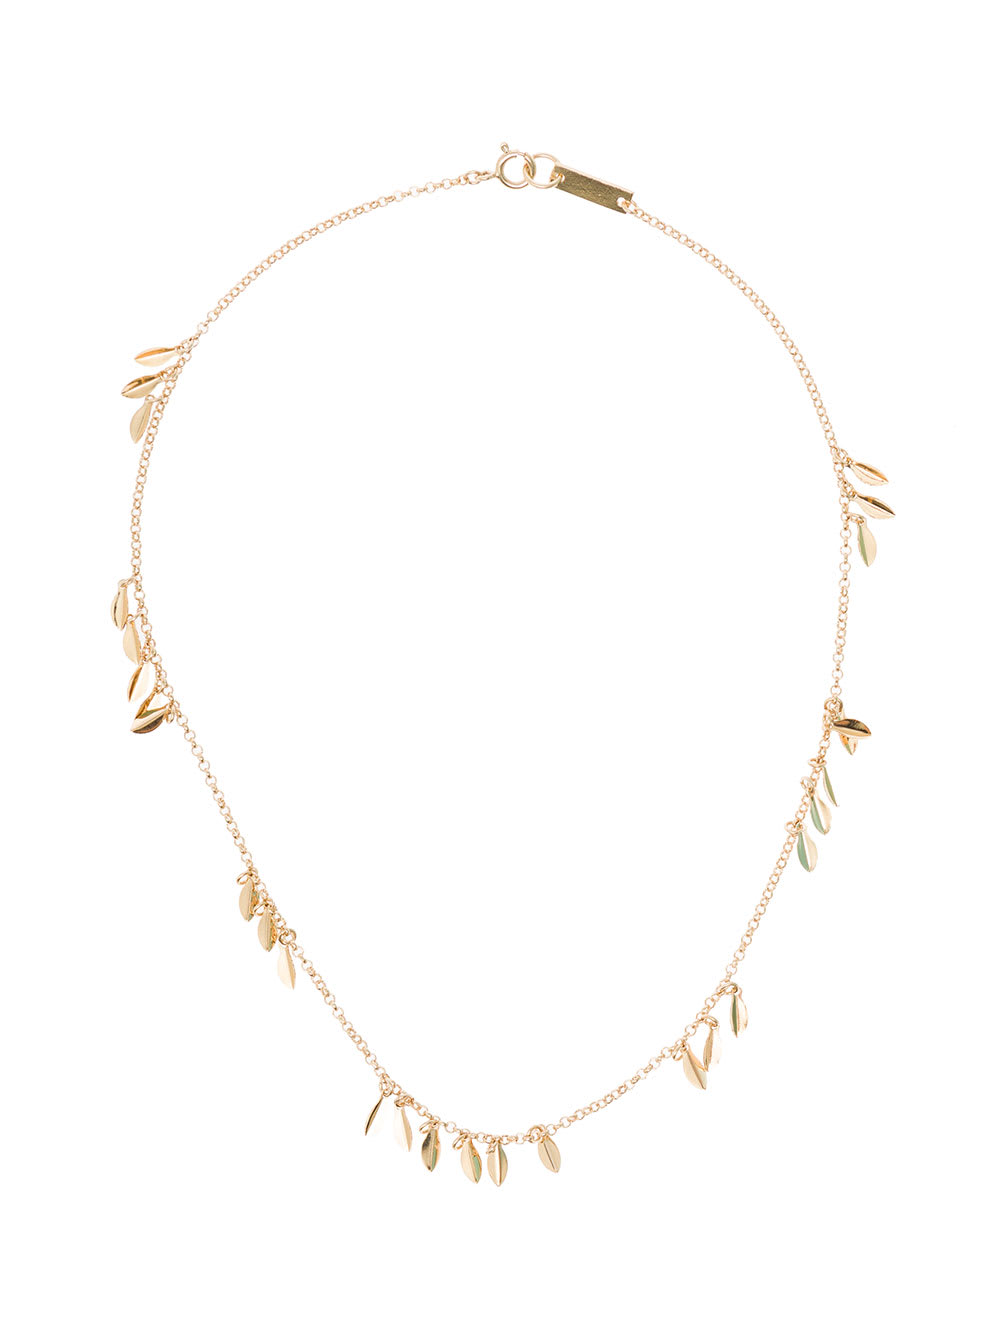 Isabel Marant Womans Chioker Metal Necklace With Leaves Detail